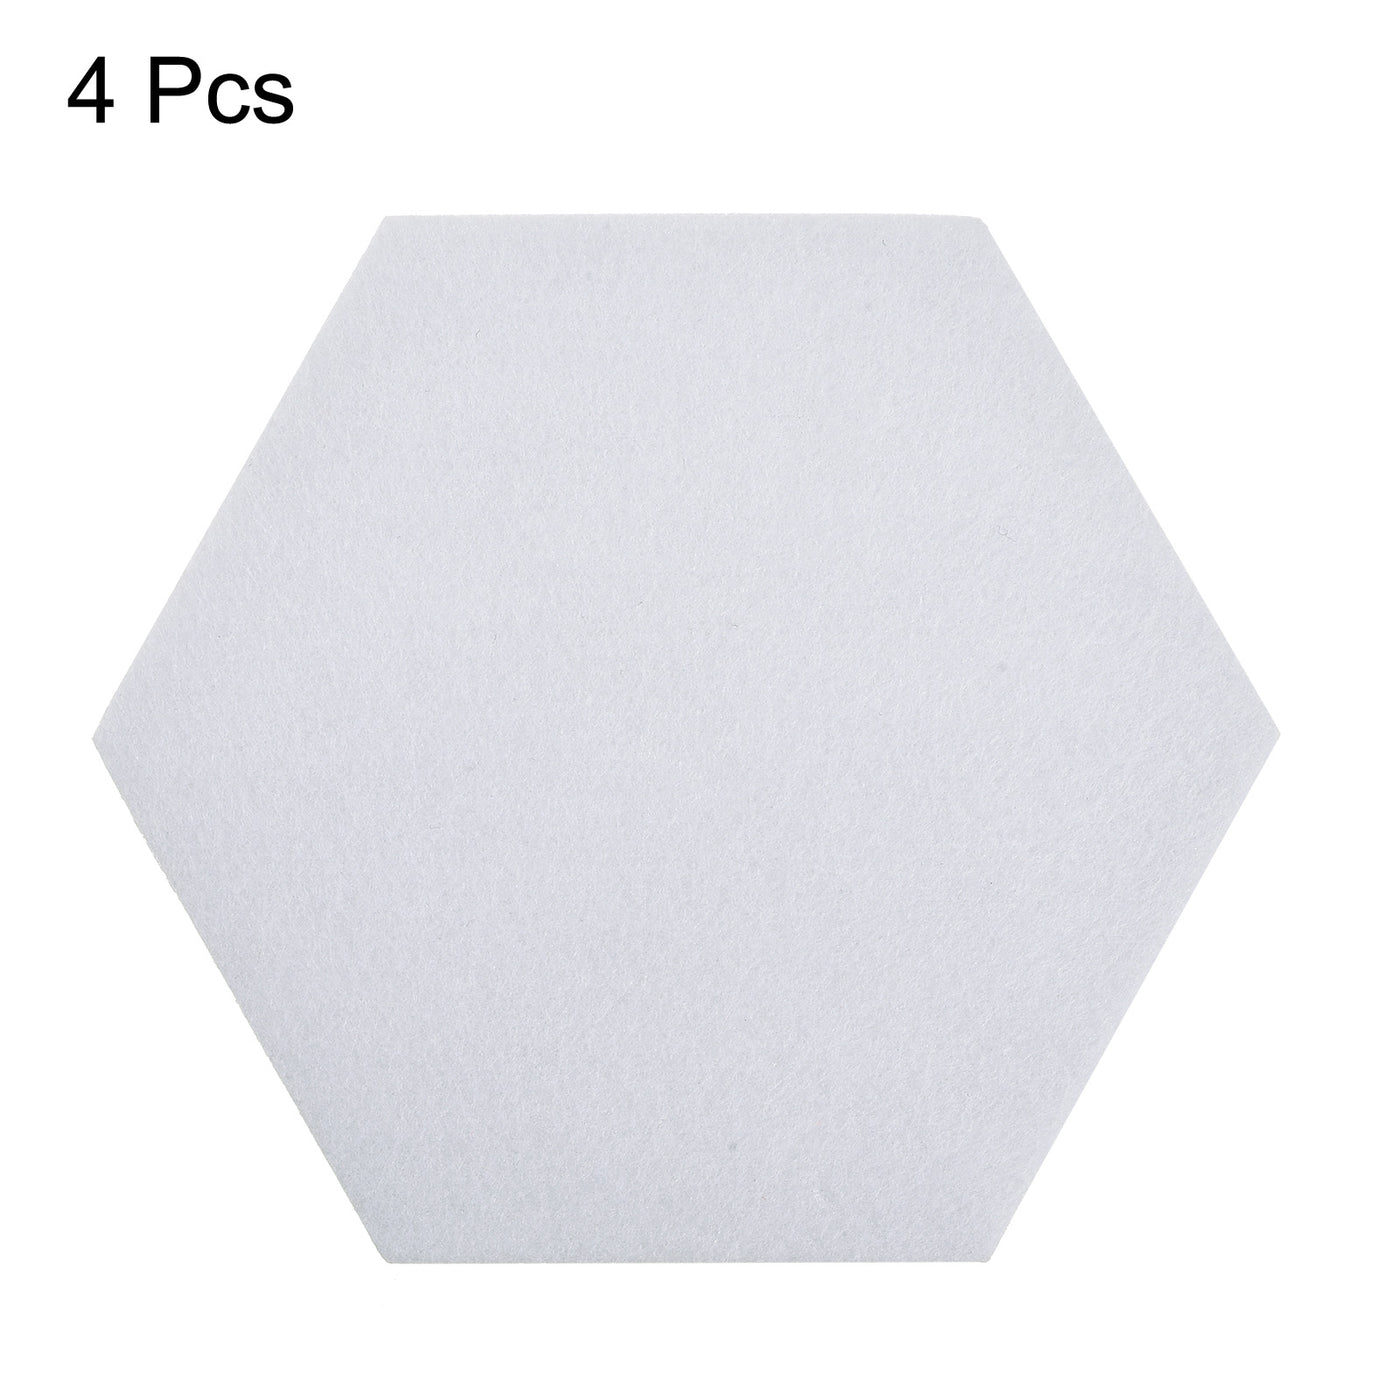 uxcell Uxcell Felt Coasters 4pcs Absorbent Pad Coaster for Drink Cup Pot Bowl Vase White